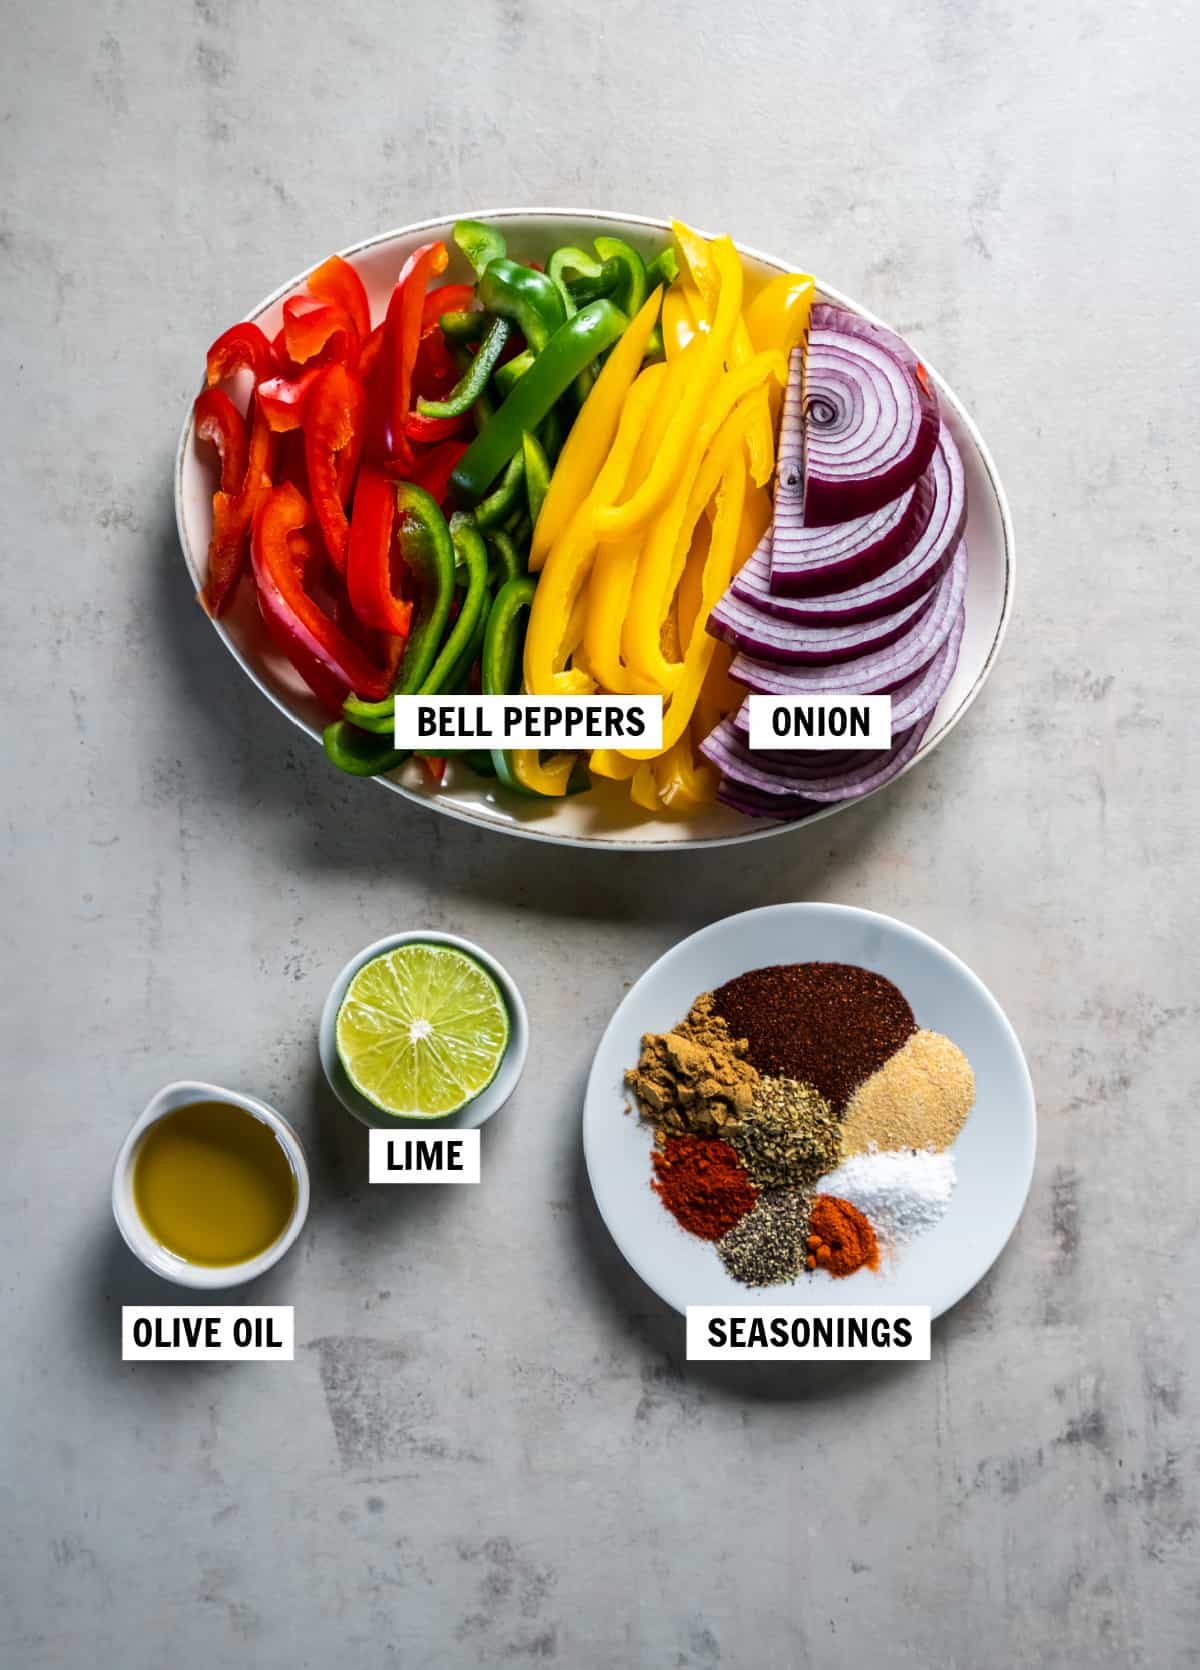 All of the ingredients for veggie fajitas in plates or bowls on a gray countertop - including bell peppers, onion, olive oil, lime juice and spices.